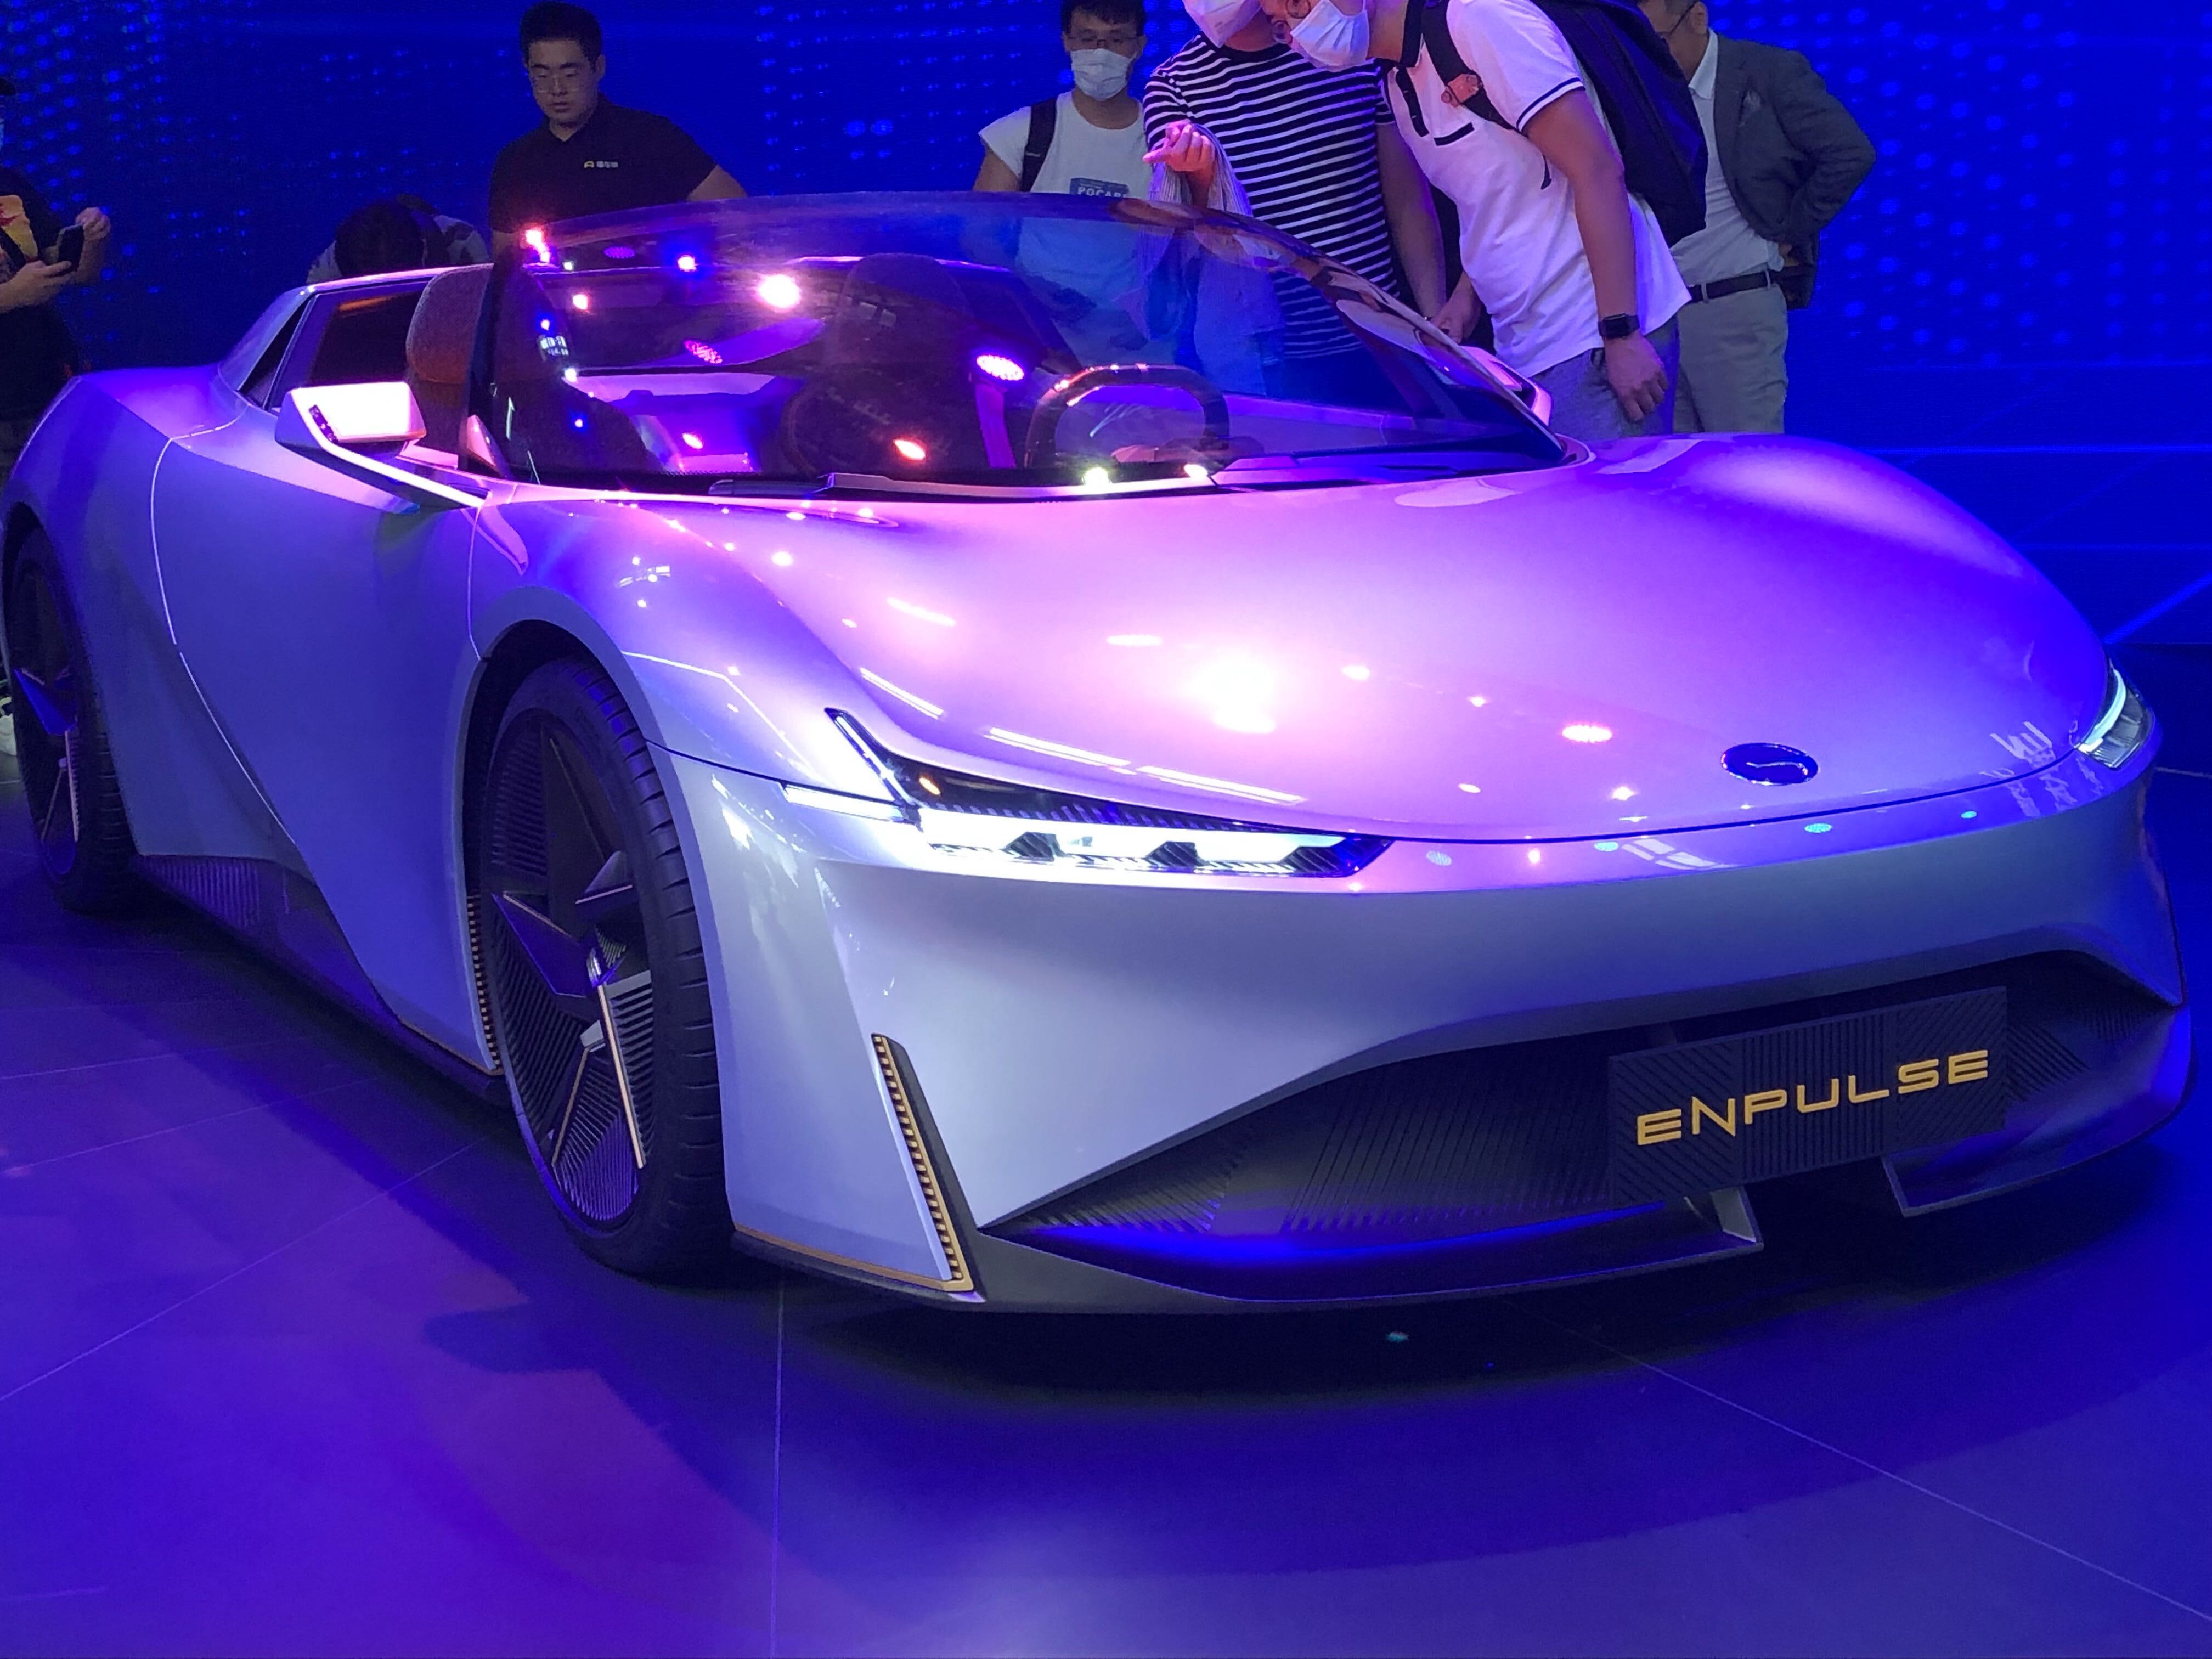 Some Chinese automakers show off concept sportscars, amid auto market slump - CNBC